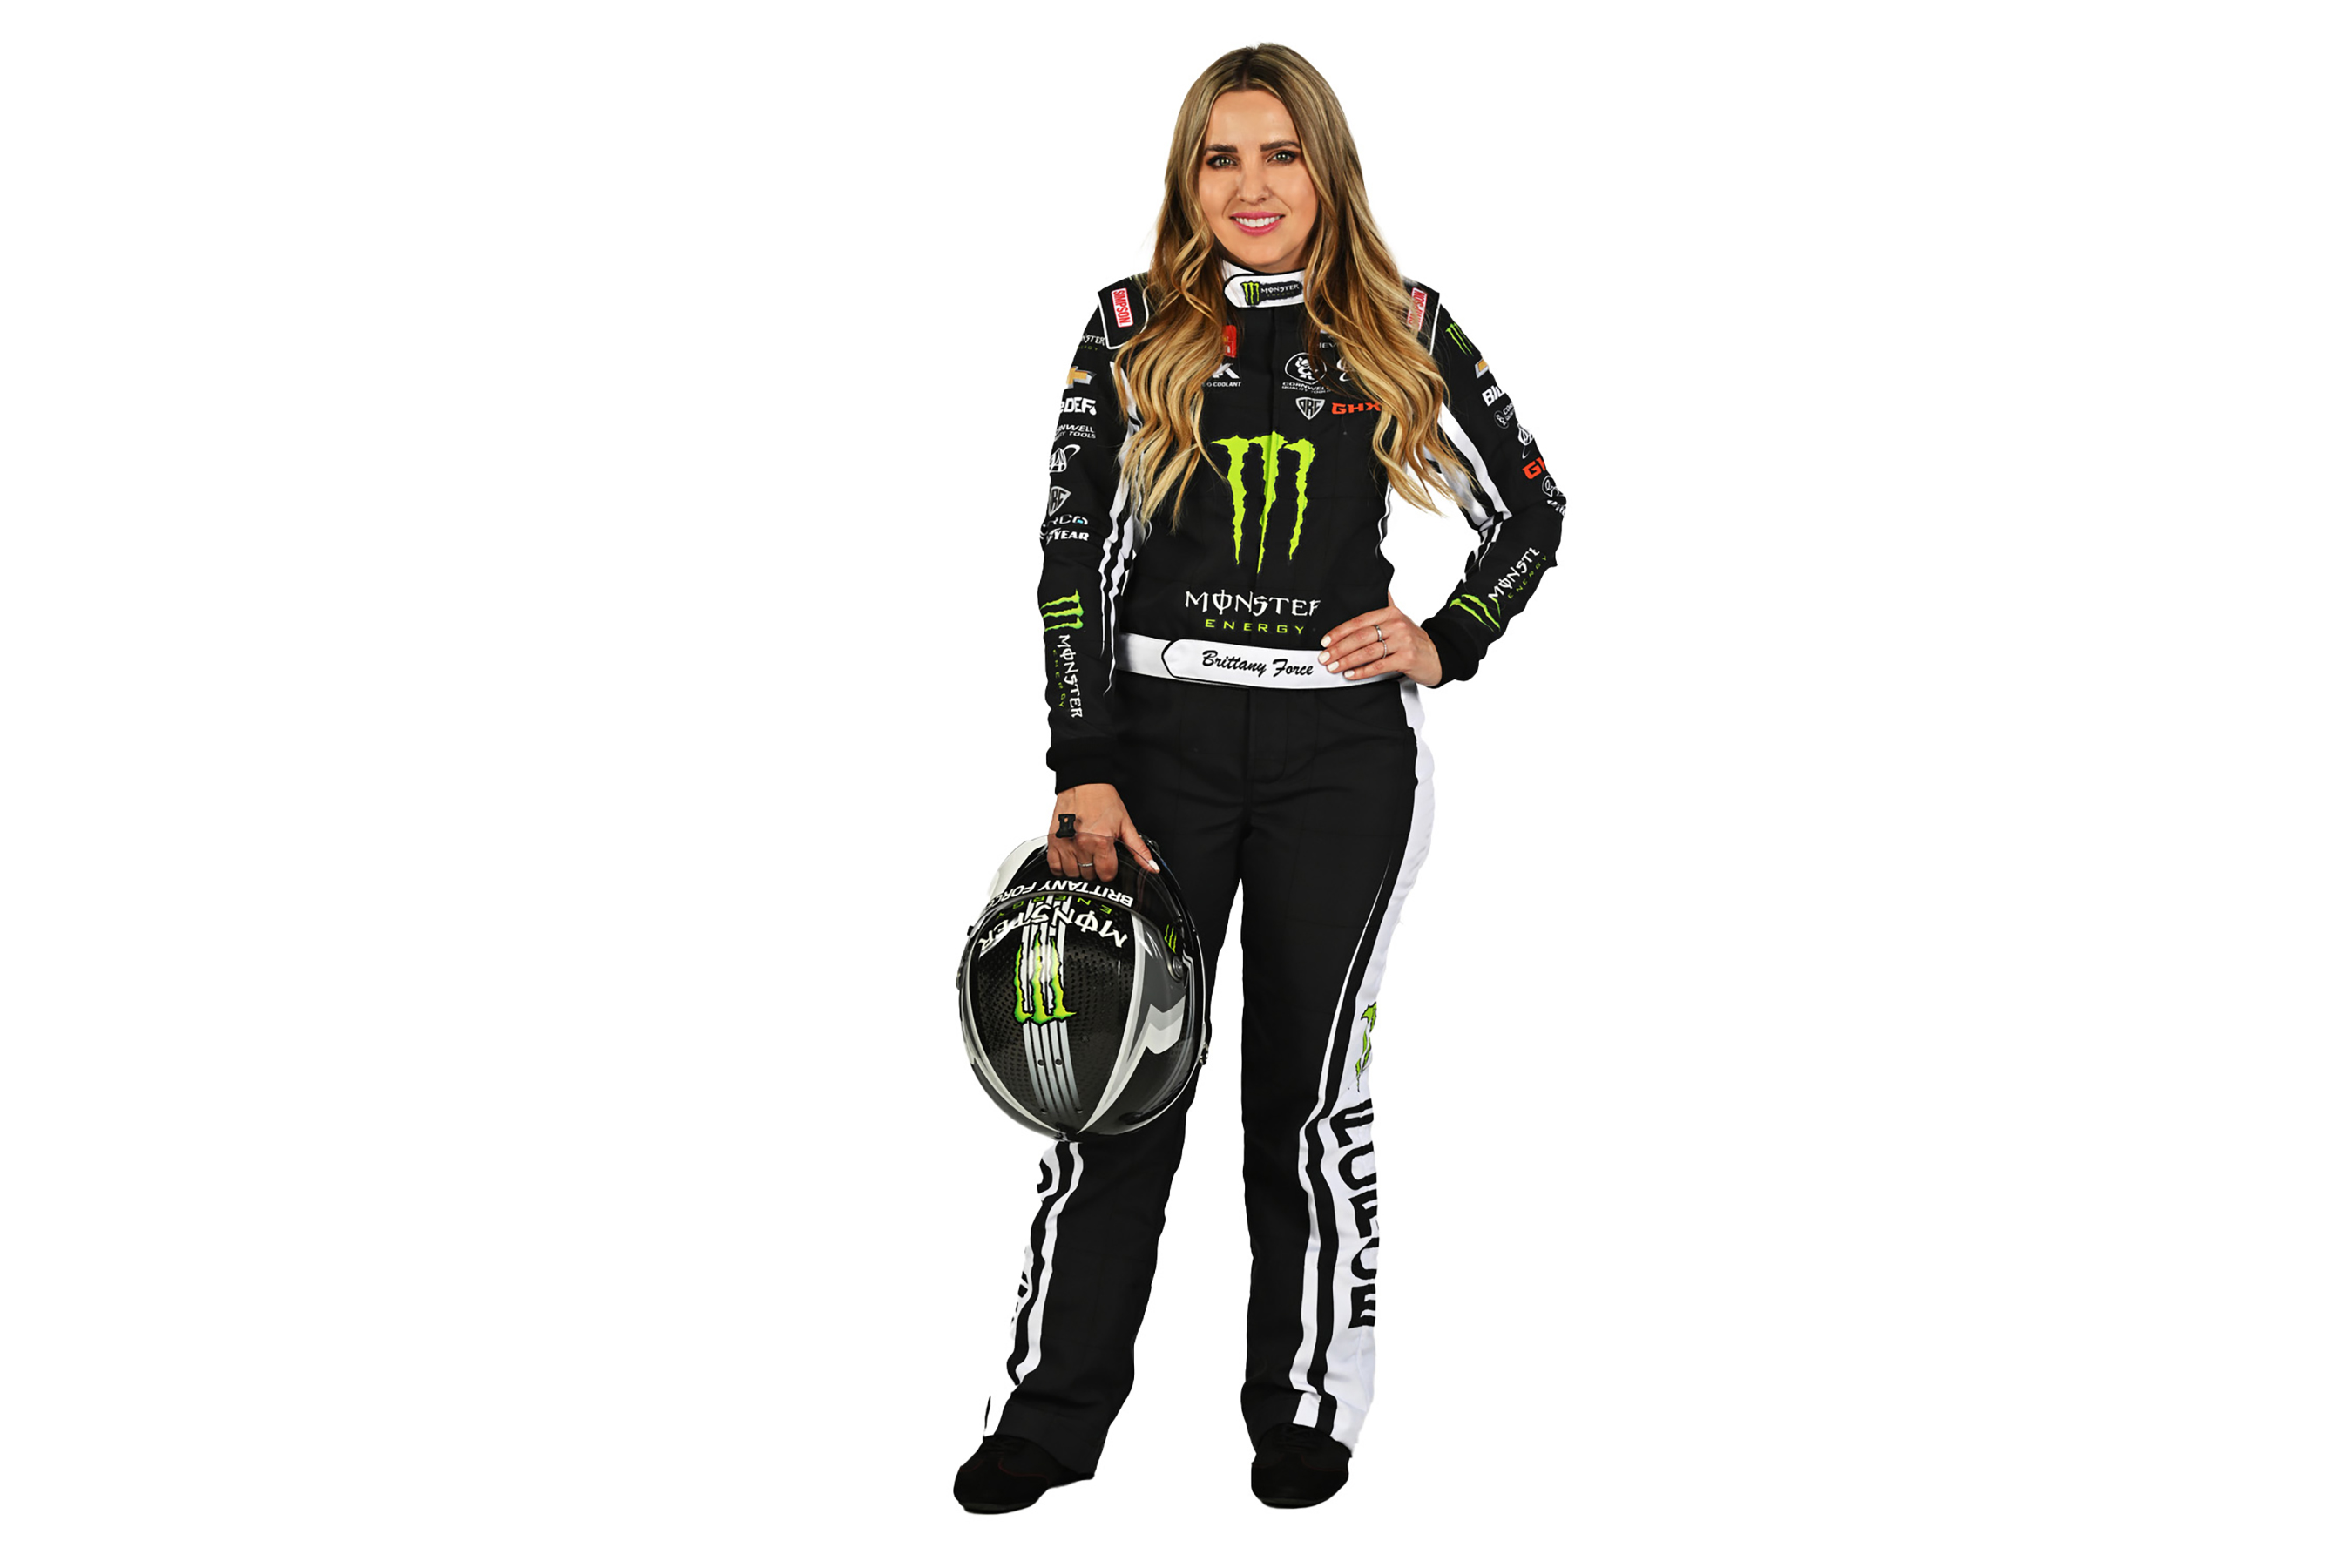 NHRA champion Brittany Force